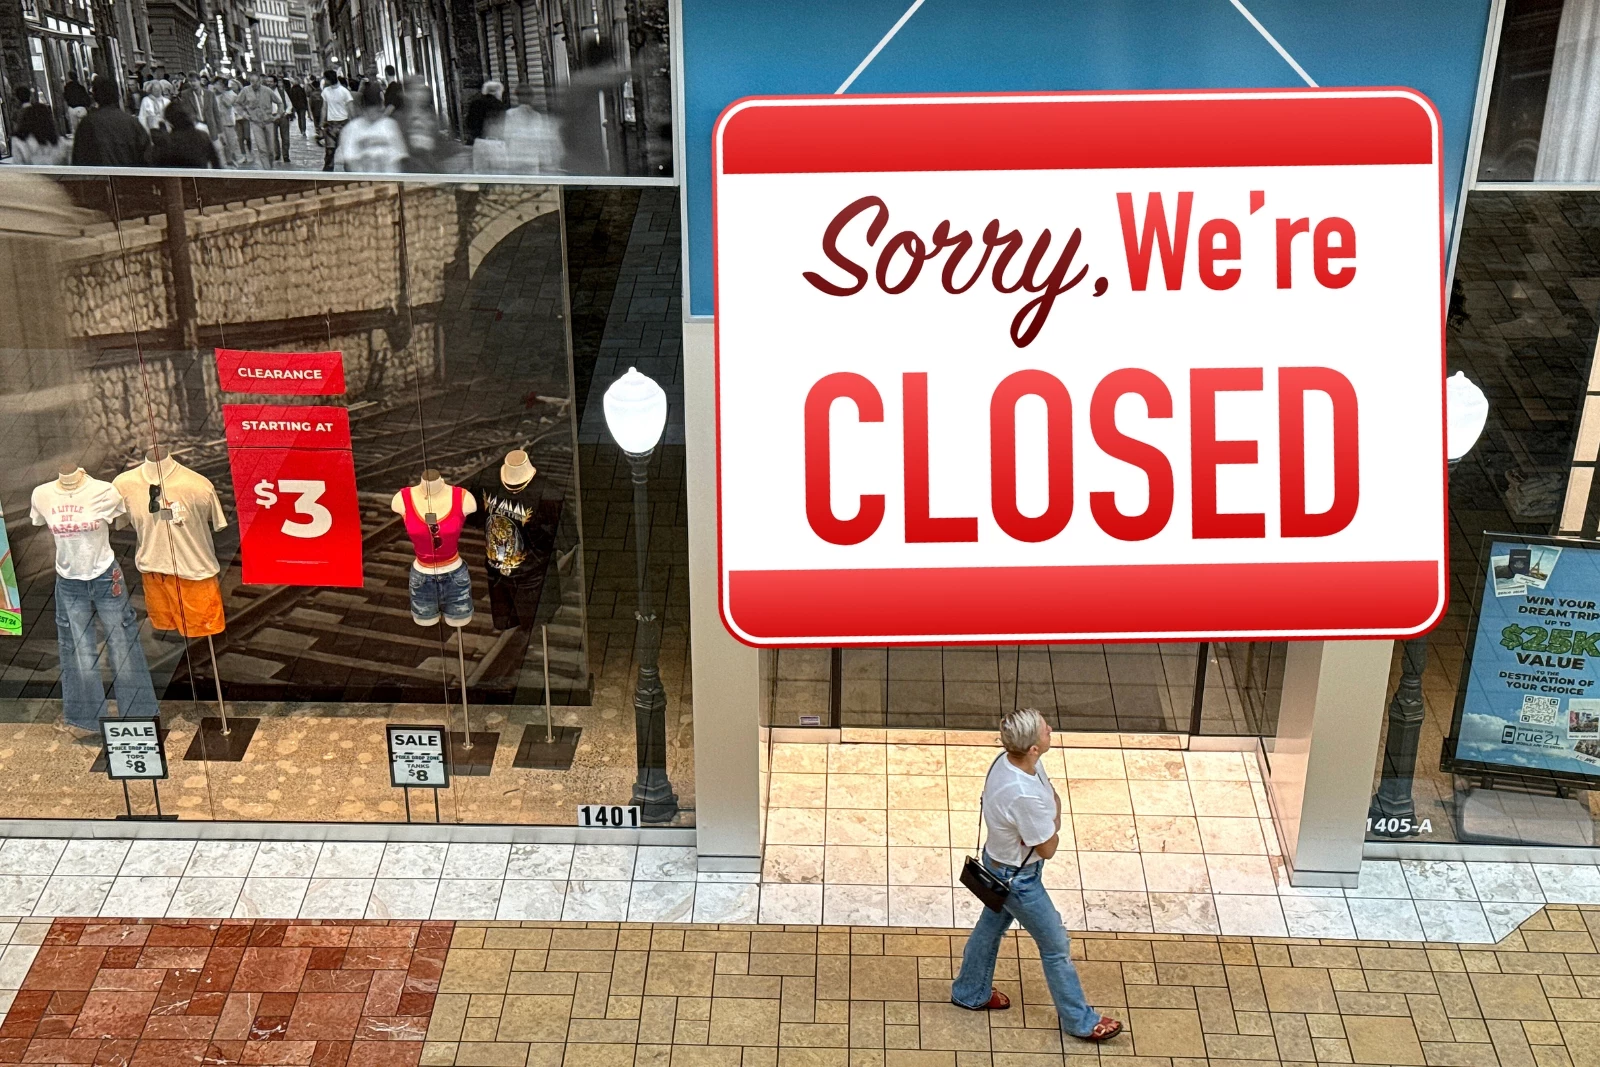 National Clothing Retailer Closing All 541 Locations Including 19 In
Michigan